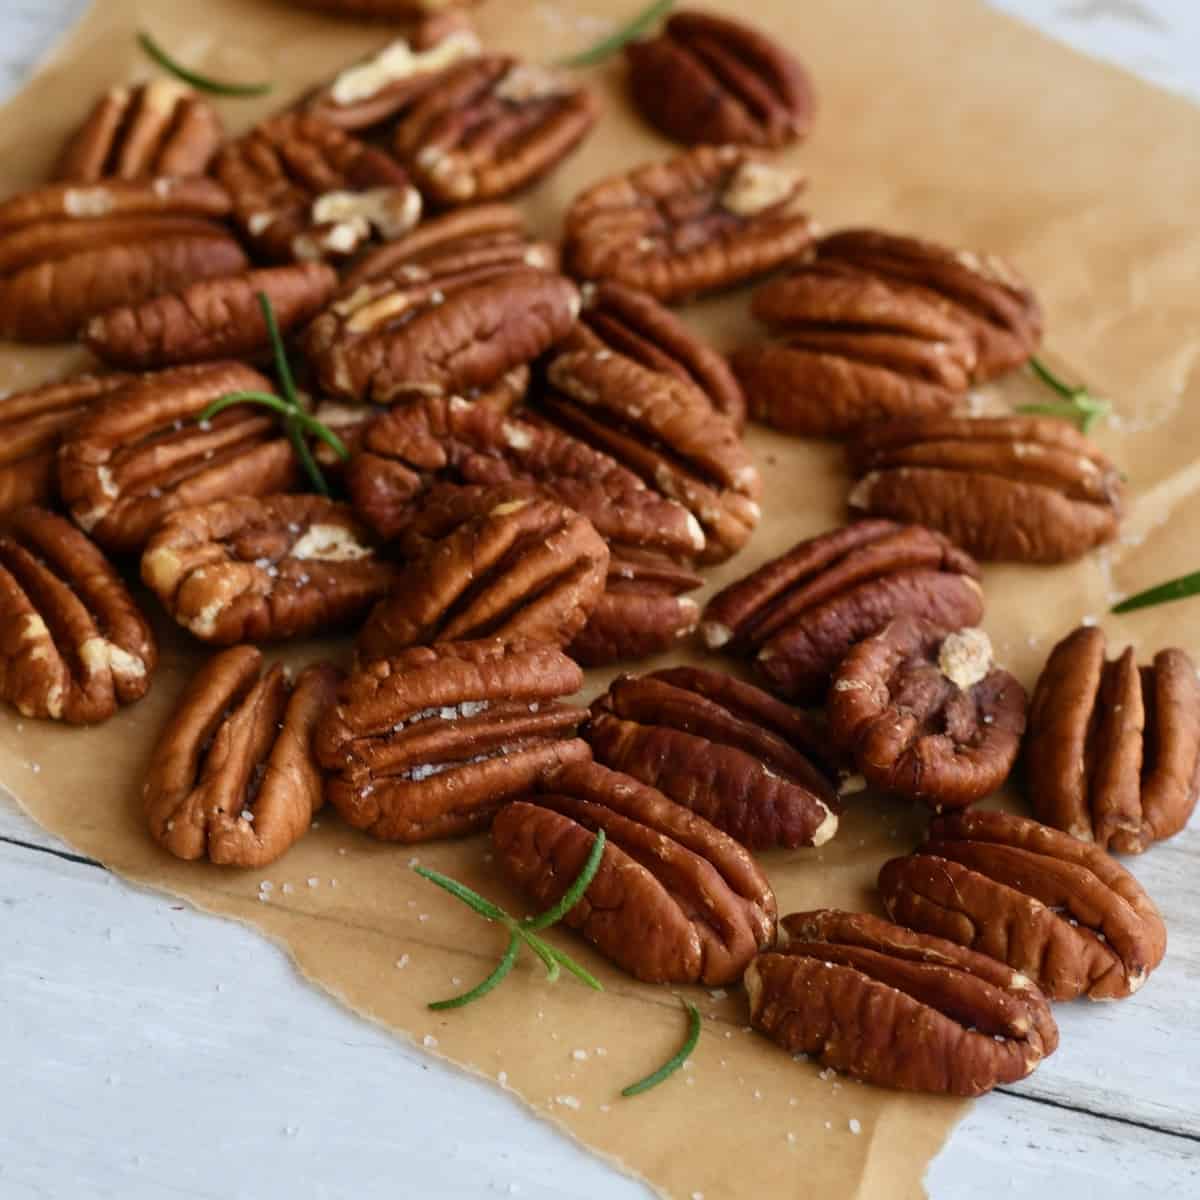 Pecan halves with salt and rosemary on brown parchment paper.